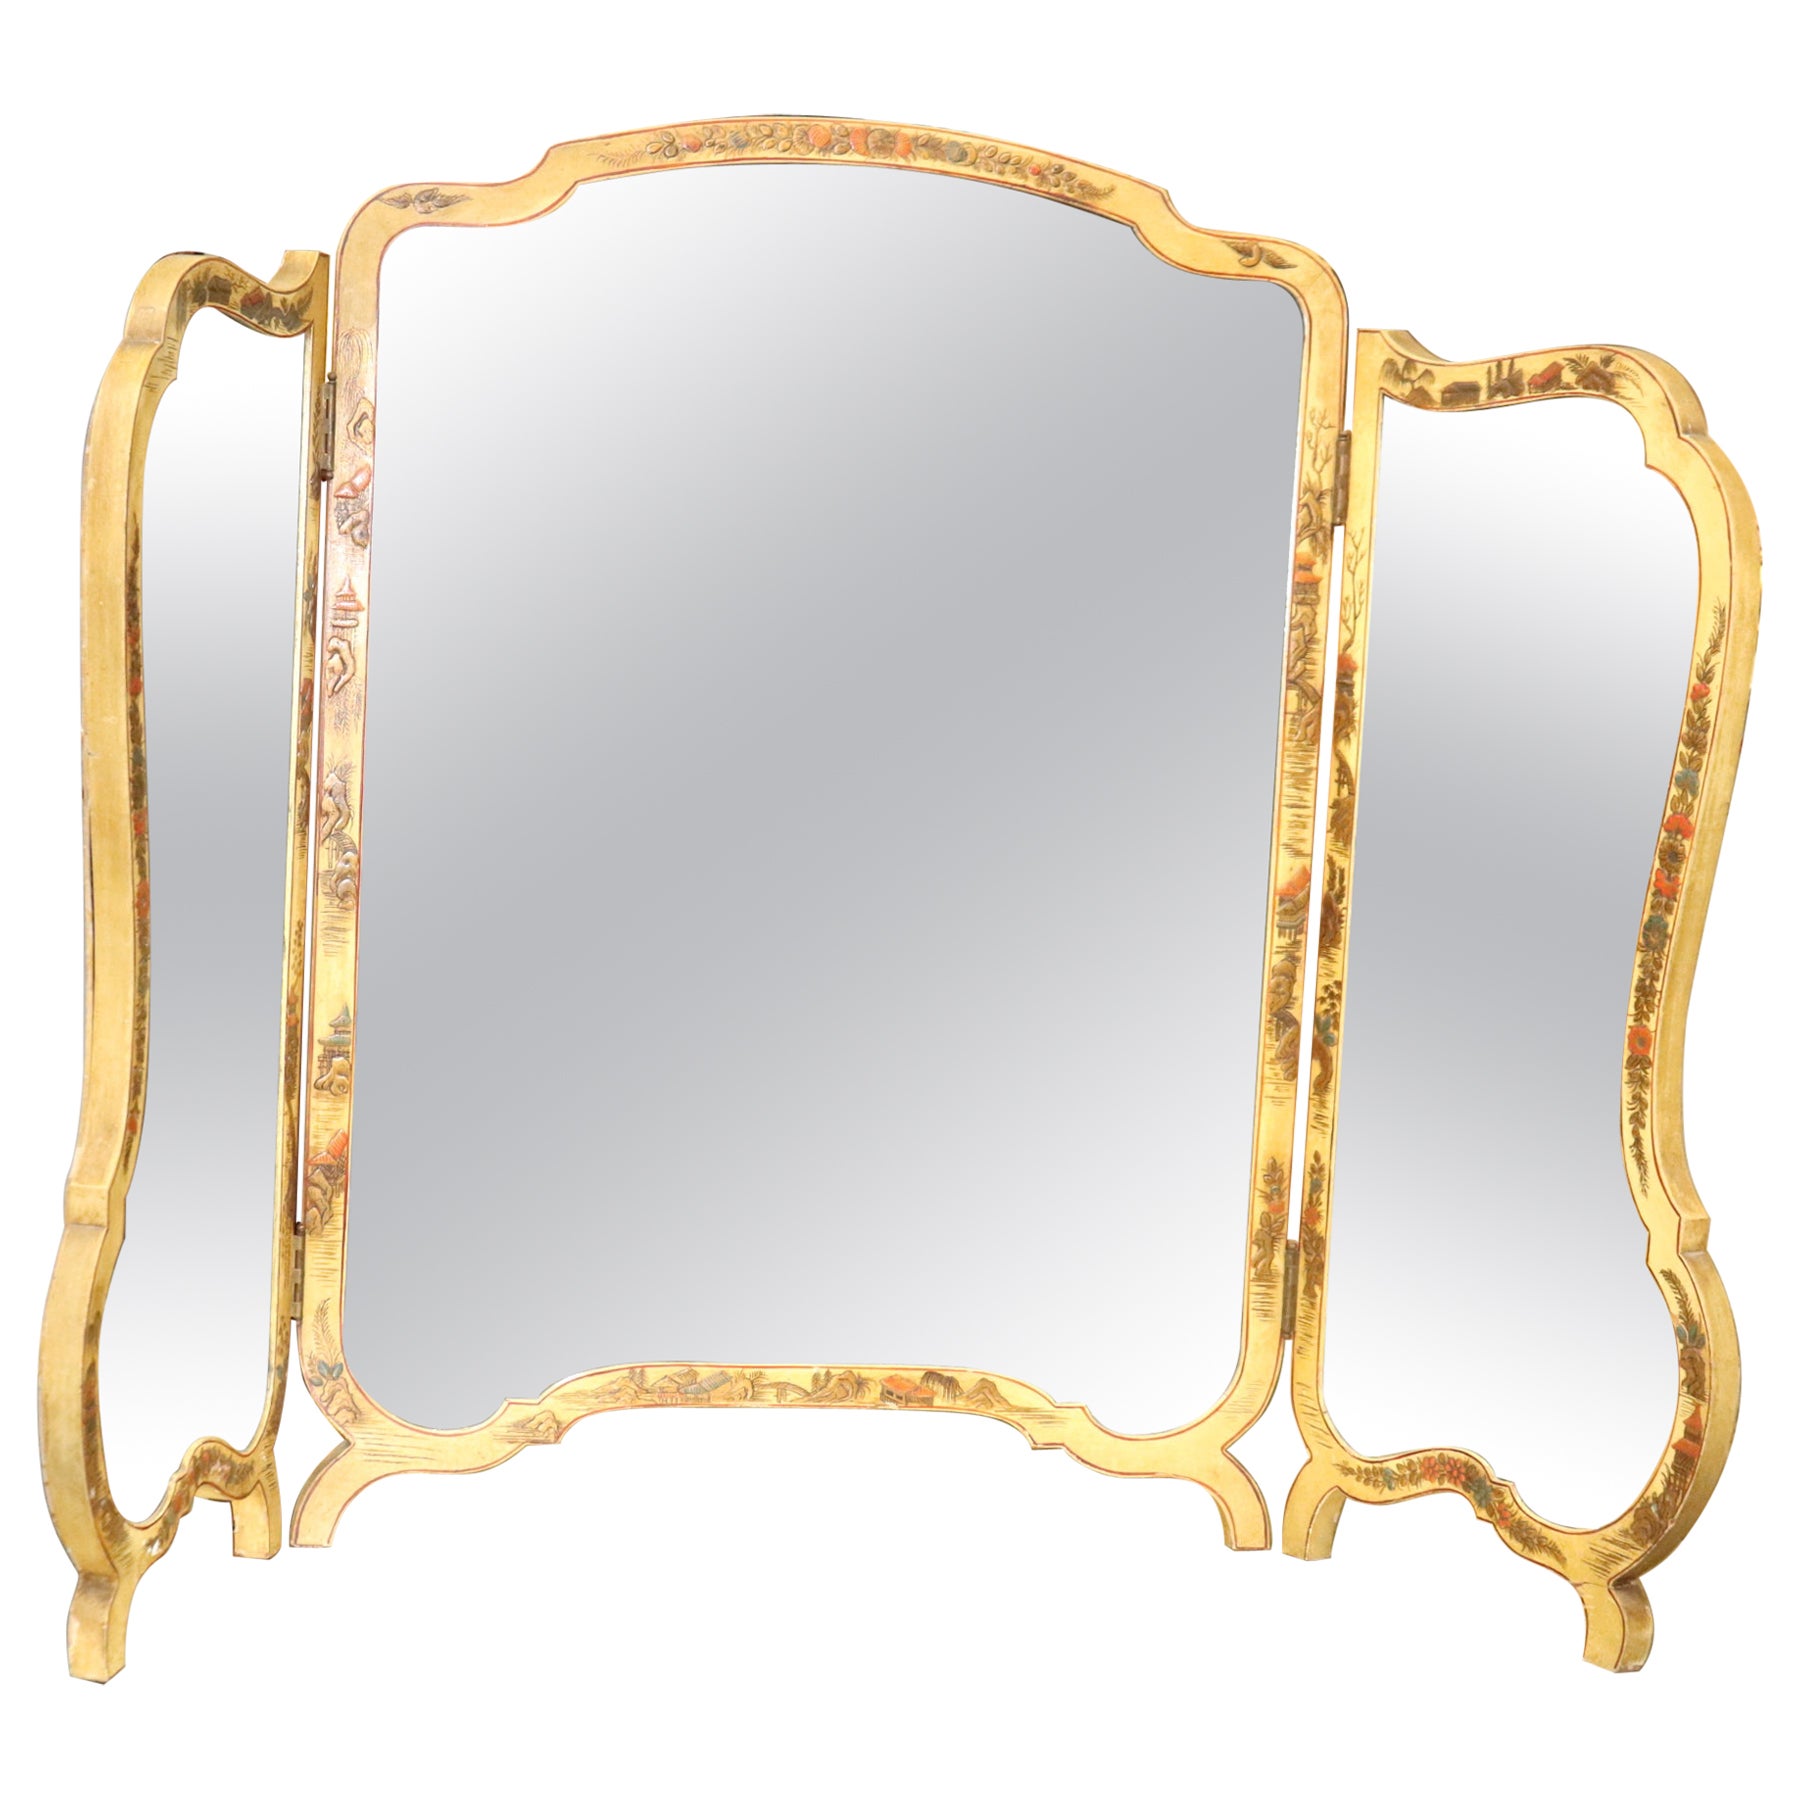 Tri-Fold Chinoiserie Paint Decorated Folding Vanity or Wall Mirror For Sale